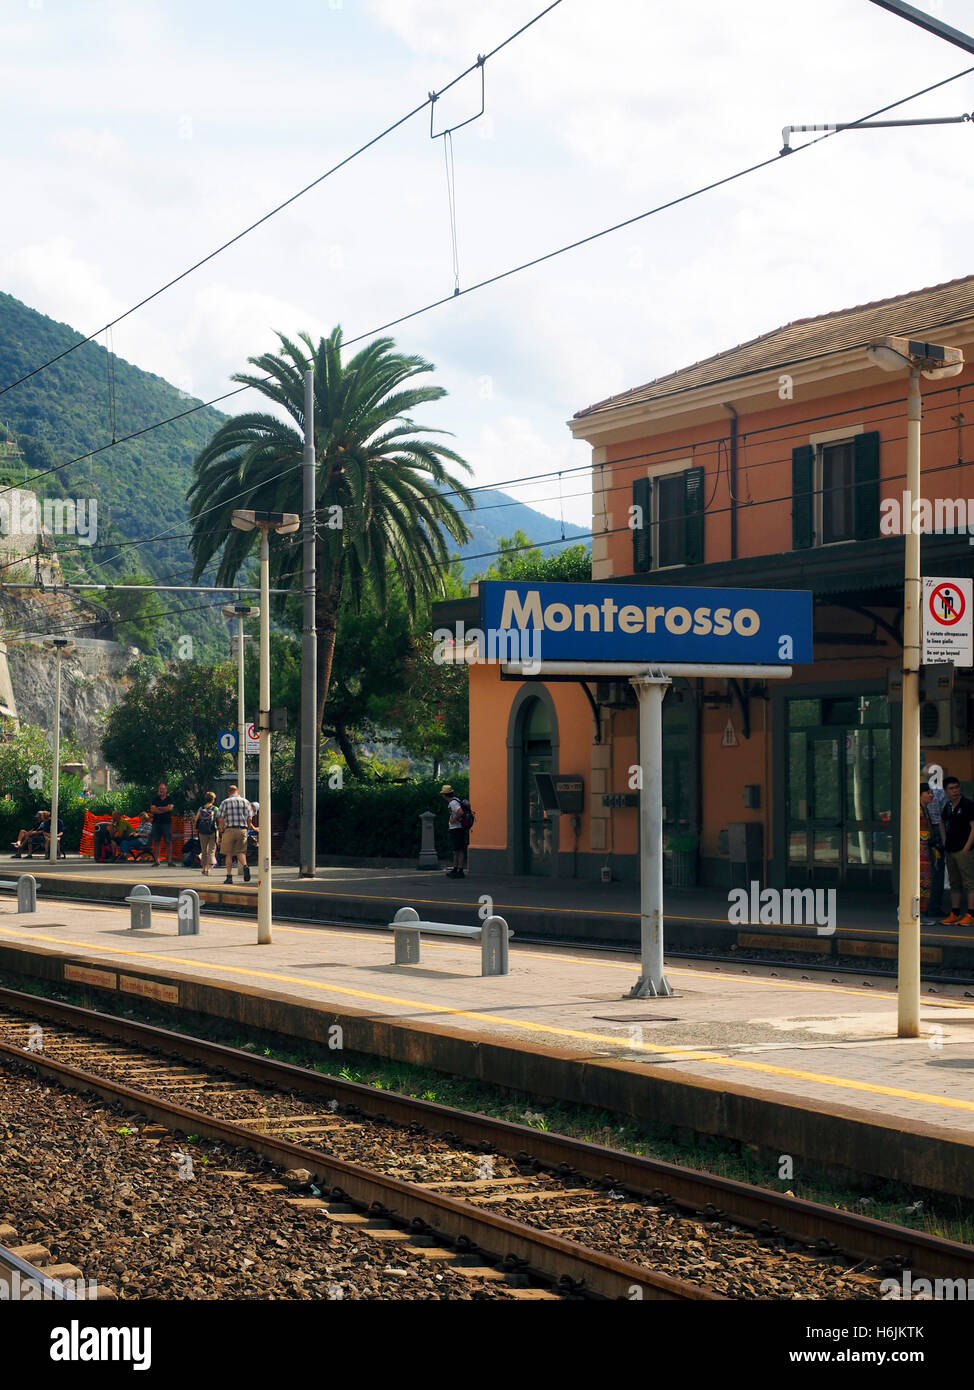 MONTEROSSO, ITALY-OCT. 24: The railroad train station is seen in the resort town of Monterosso in Cinque Terre, Italy on October Stock Photo